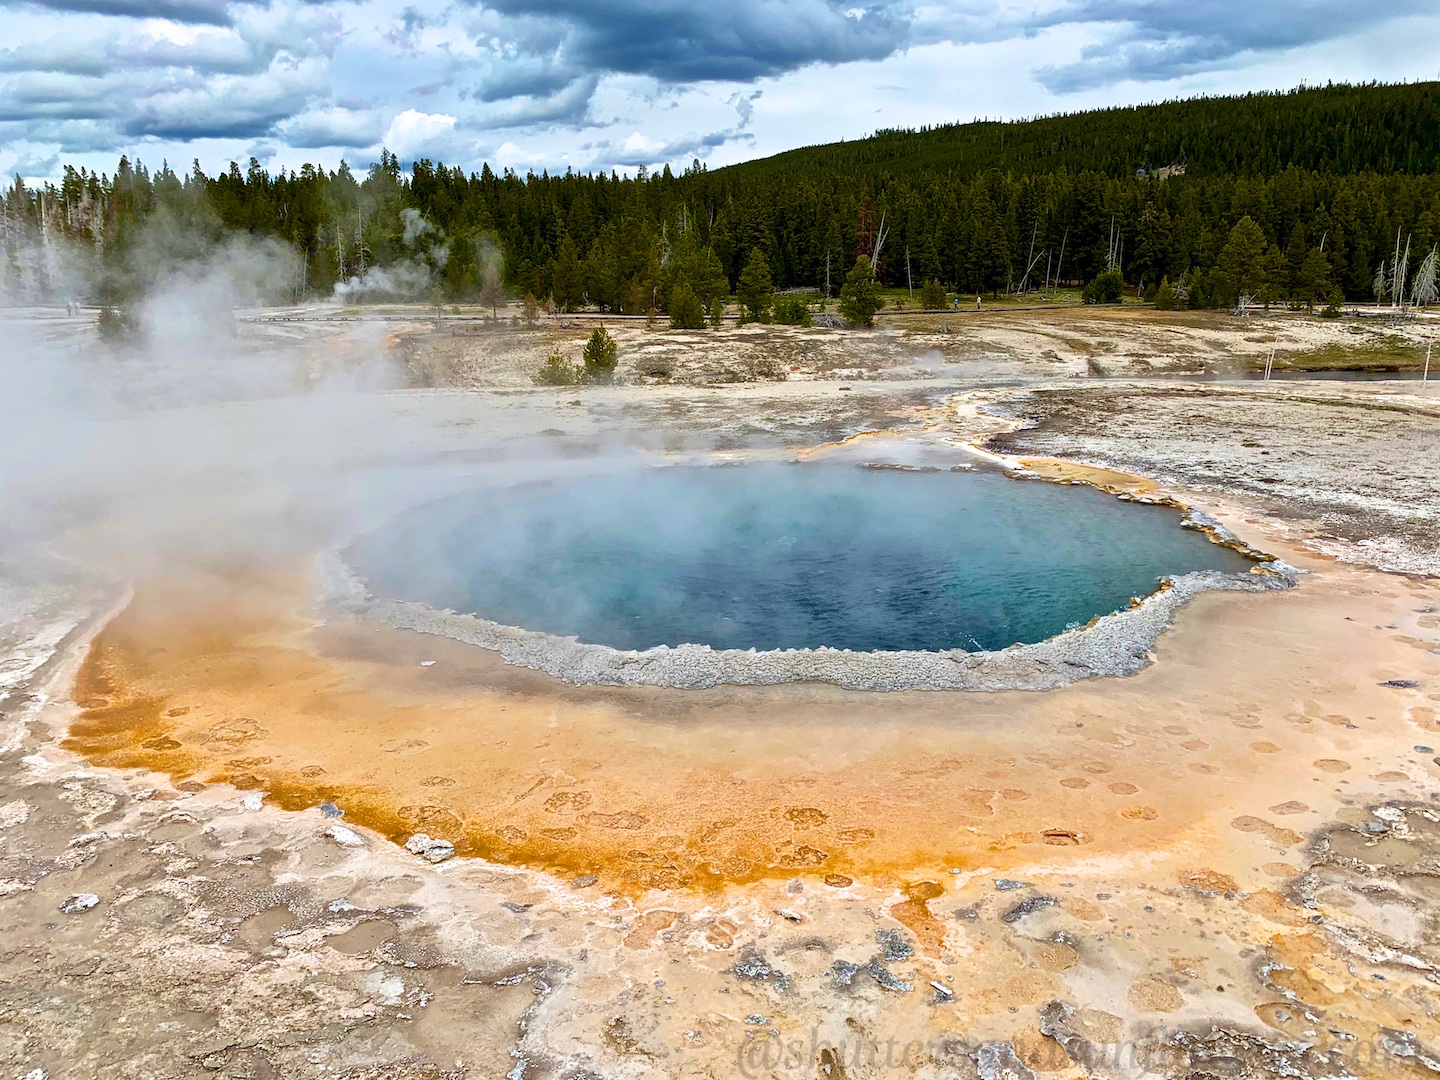 Crested pool at Upper Basin Yellowstone National Park, USA